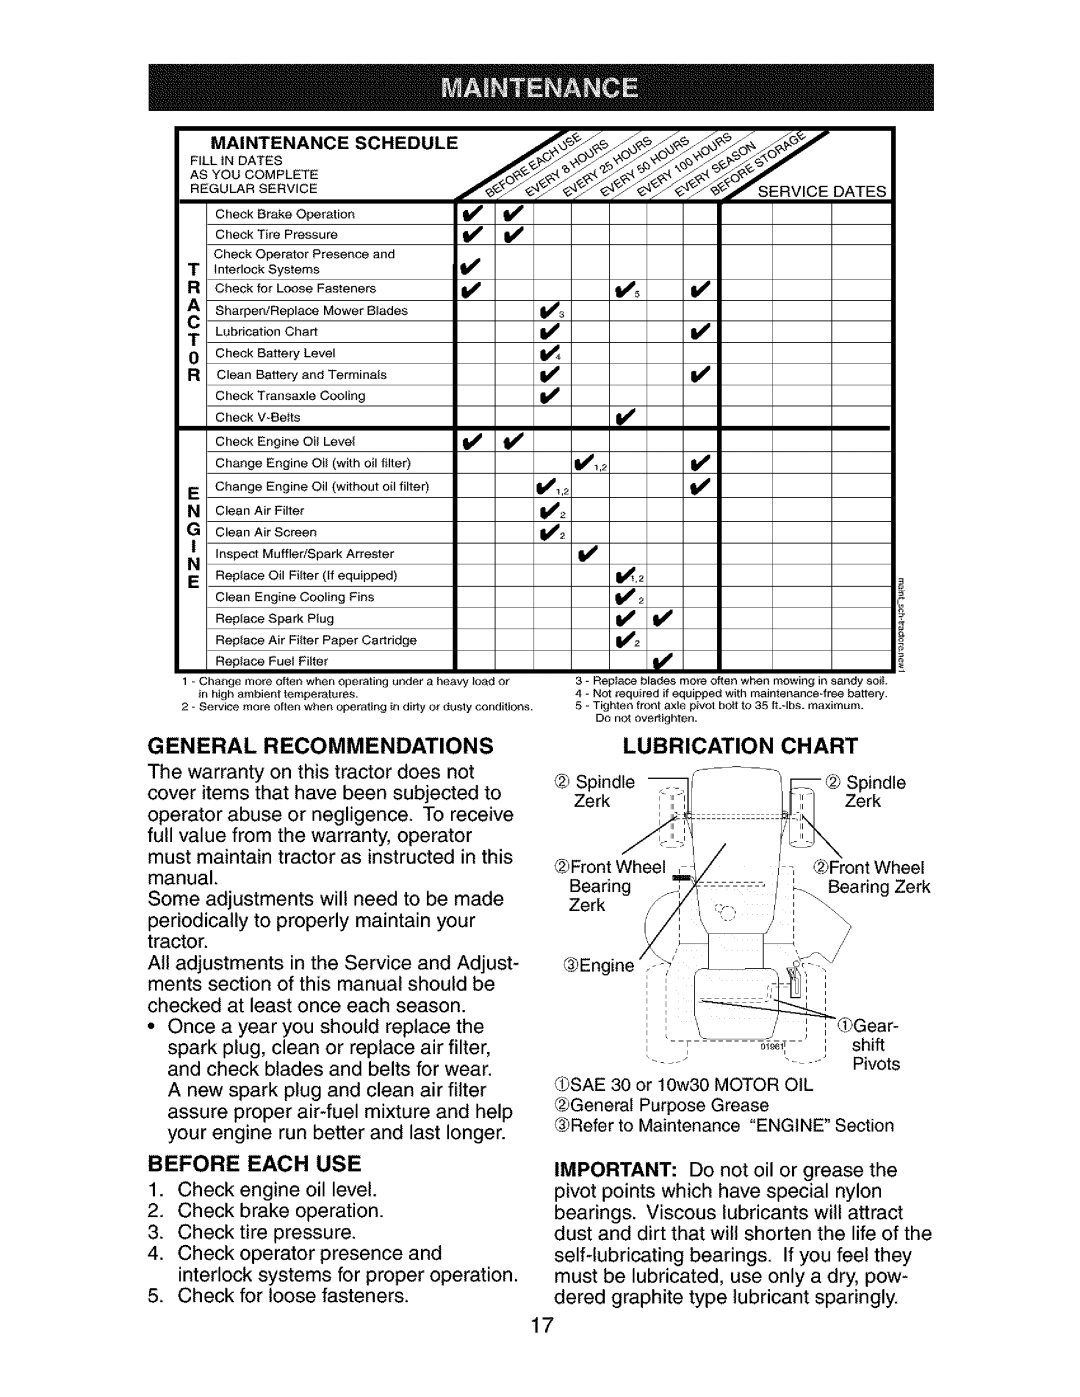 Craftsman 917.273134 owner manual General Recommendations, Before Each Use, Lubrication Chart 